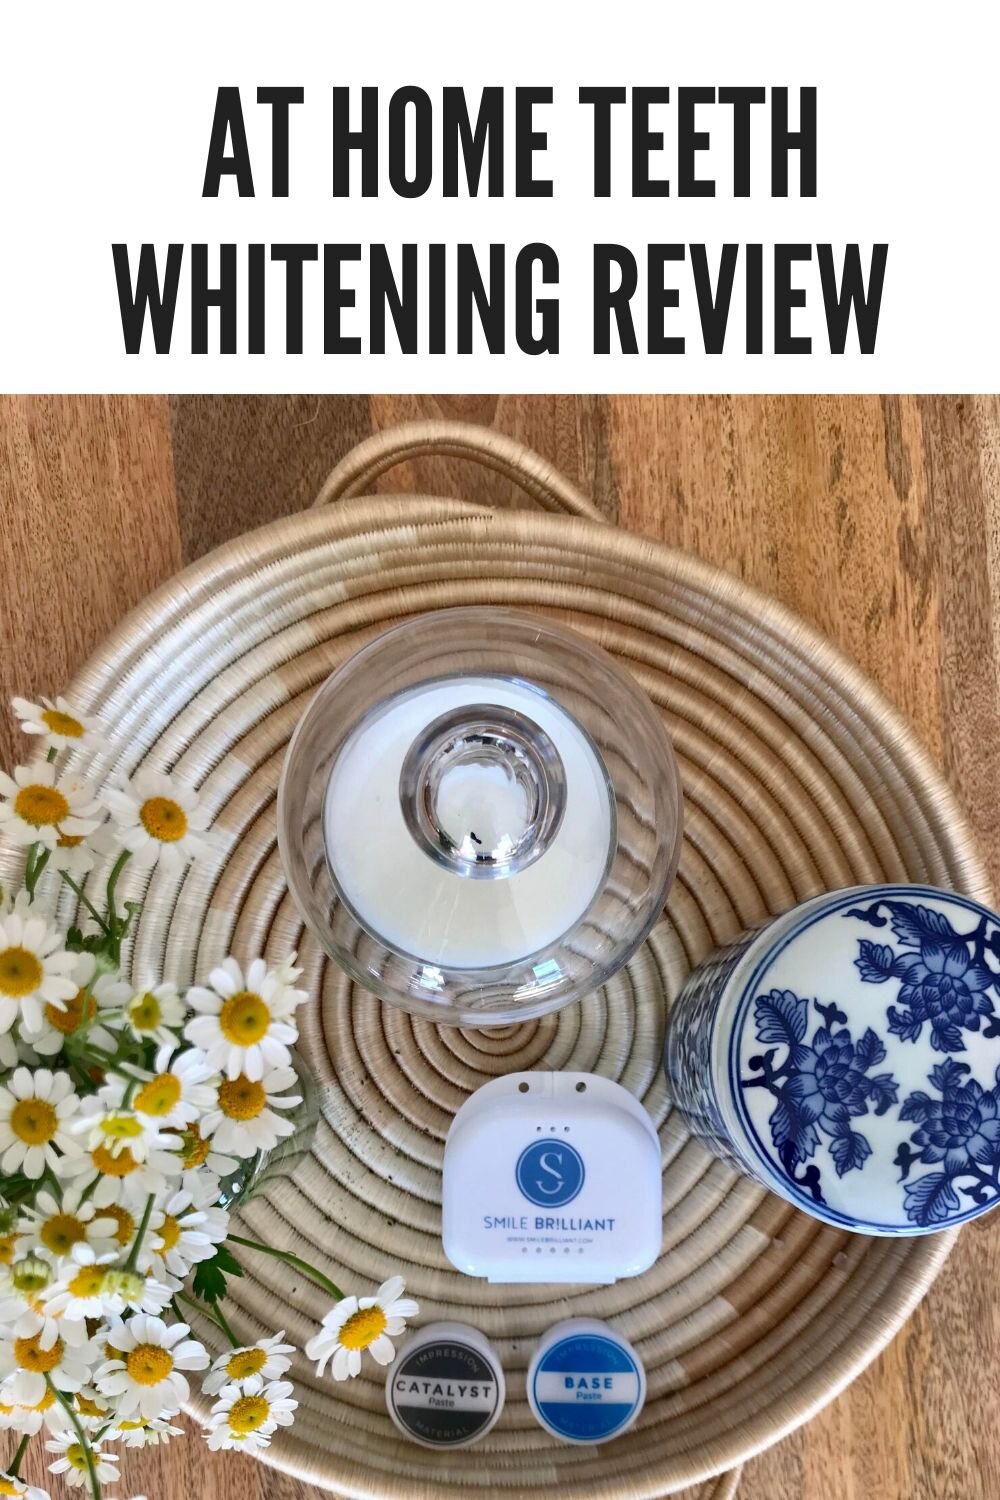 Smile Brilliant Review - See why Smile Brilliant lives up to the reviews regarding professional teeth whitening at home without any sensitivity!